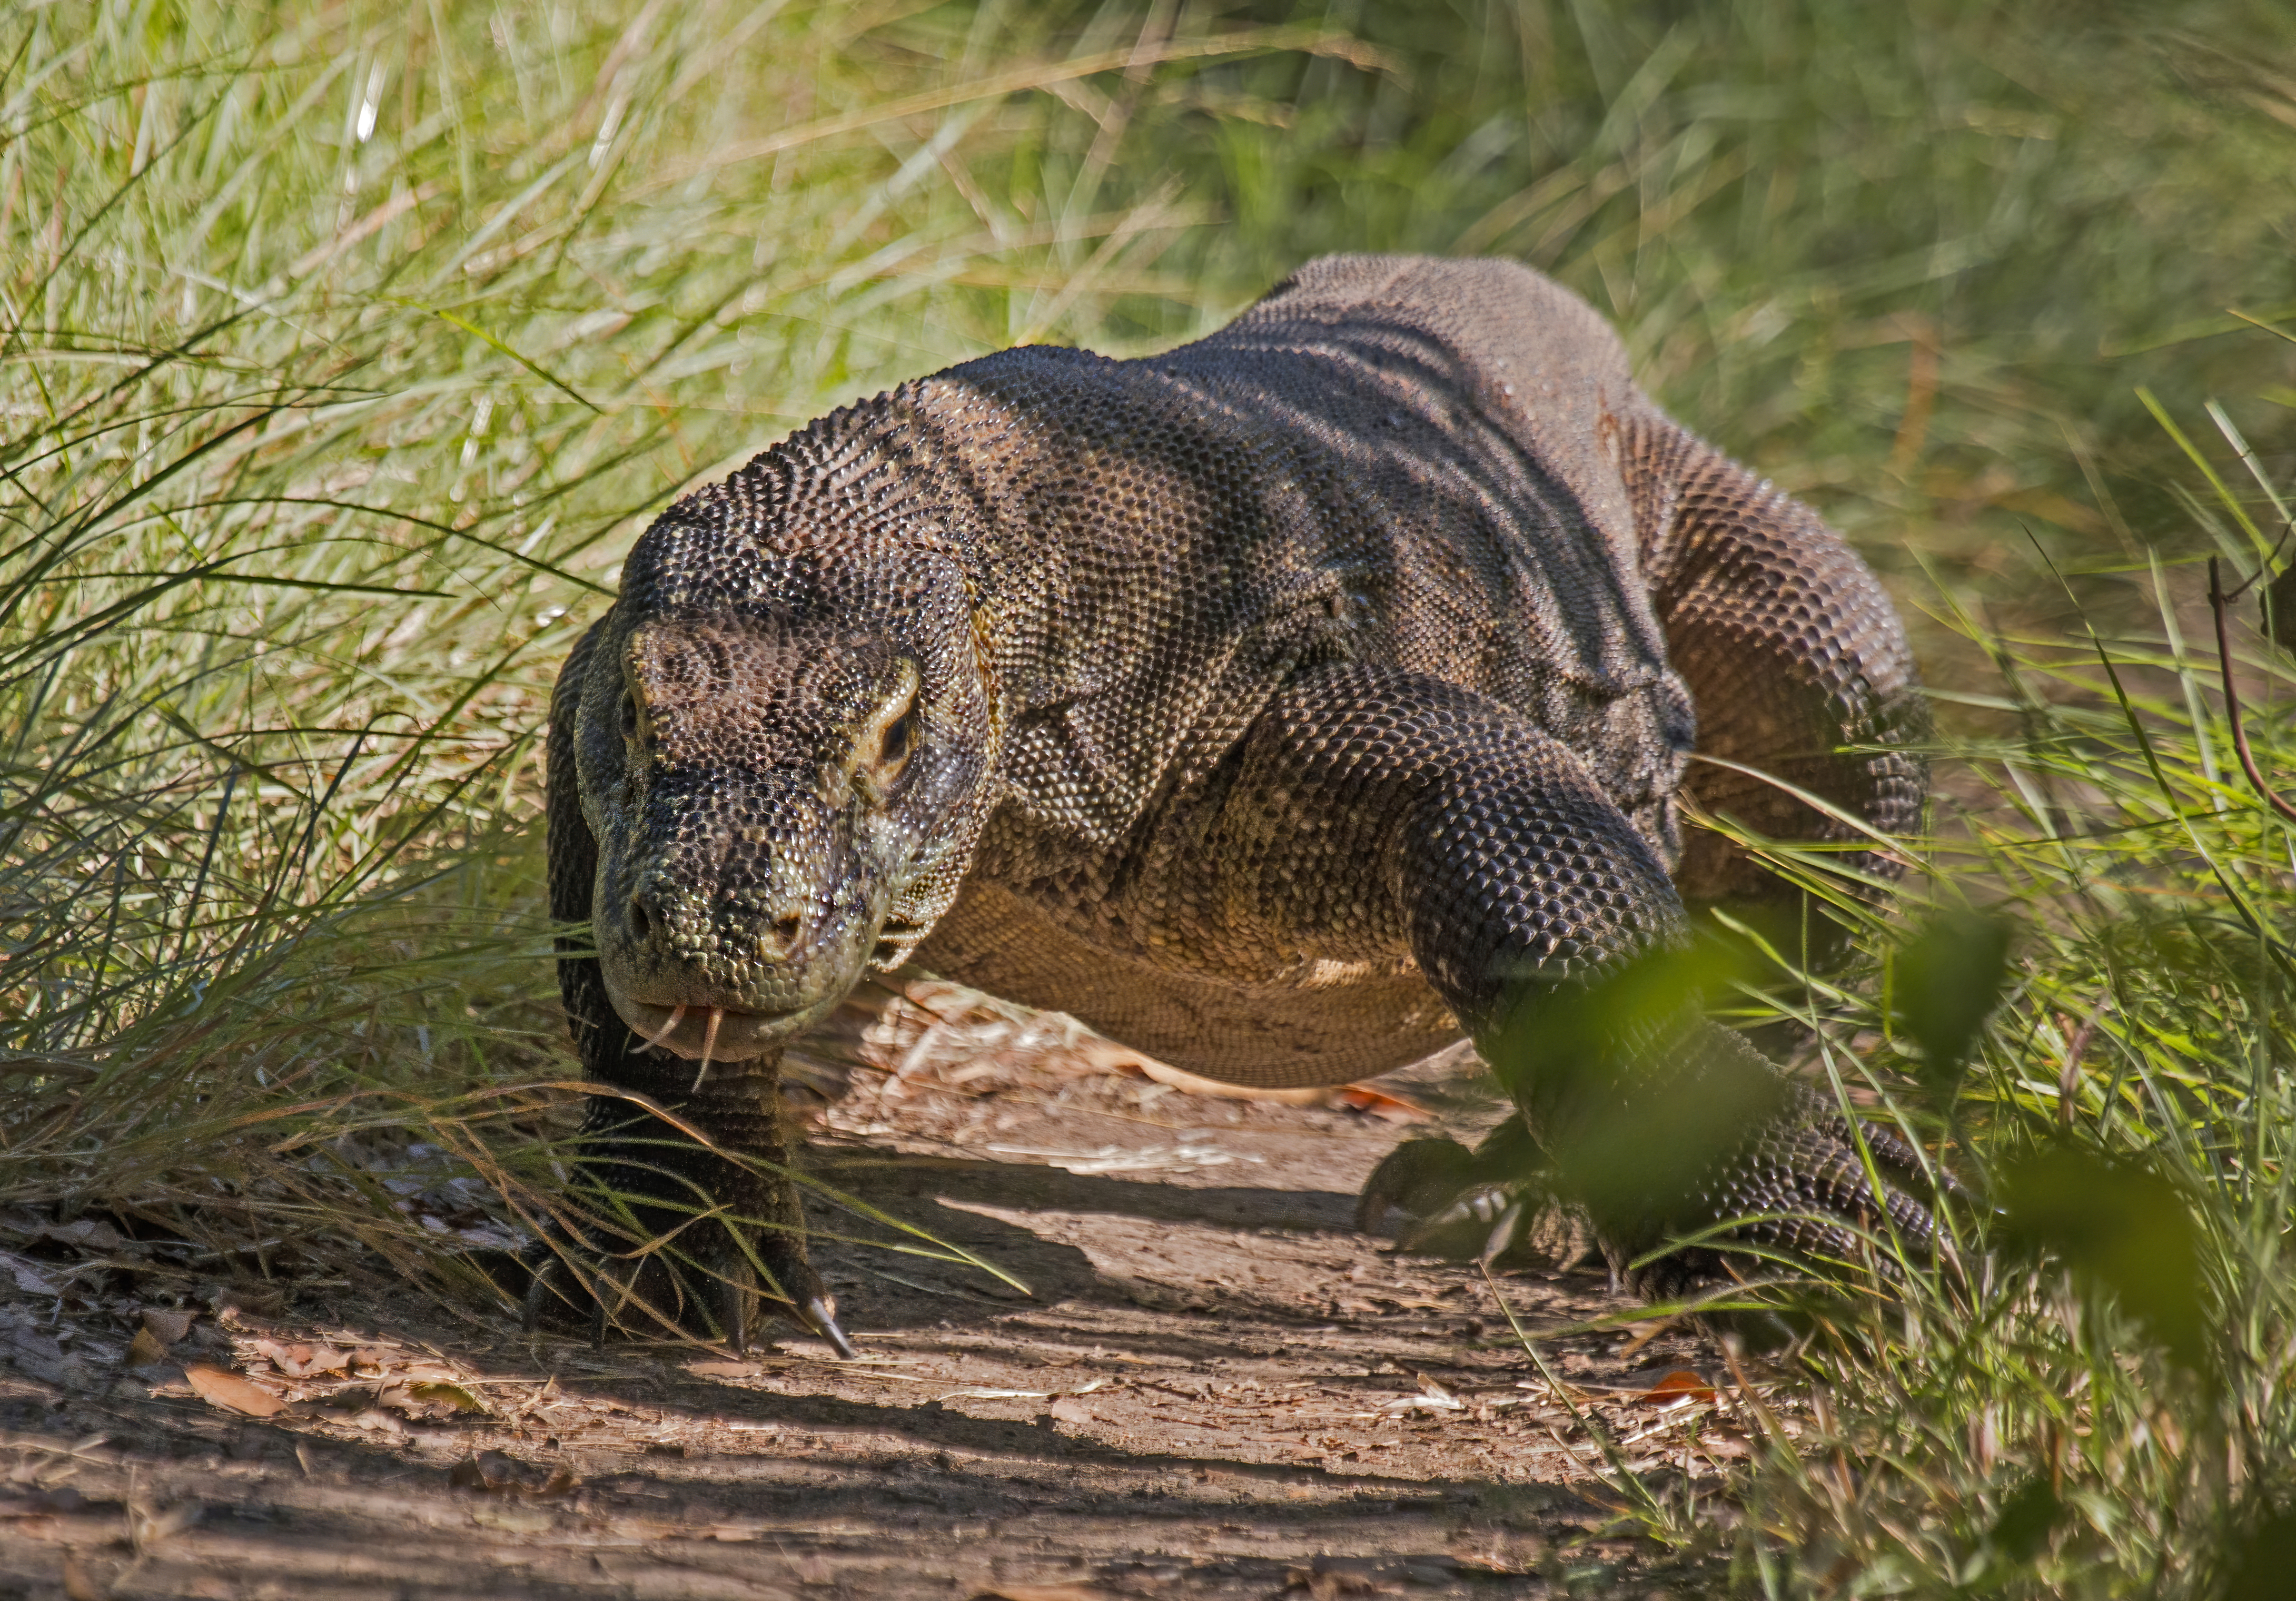 What are Komodo dragons related to?